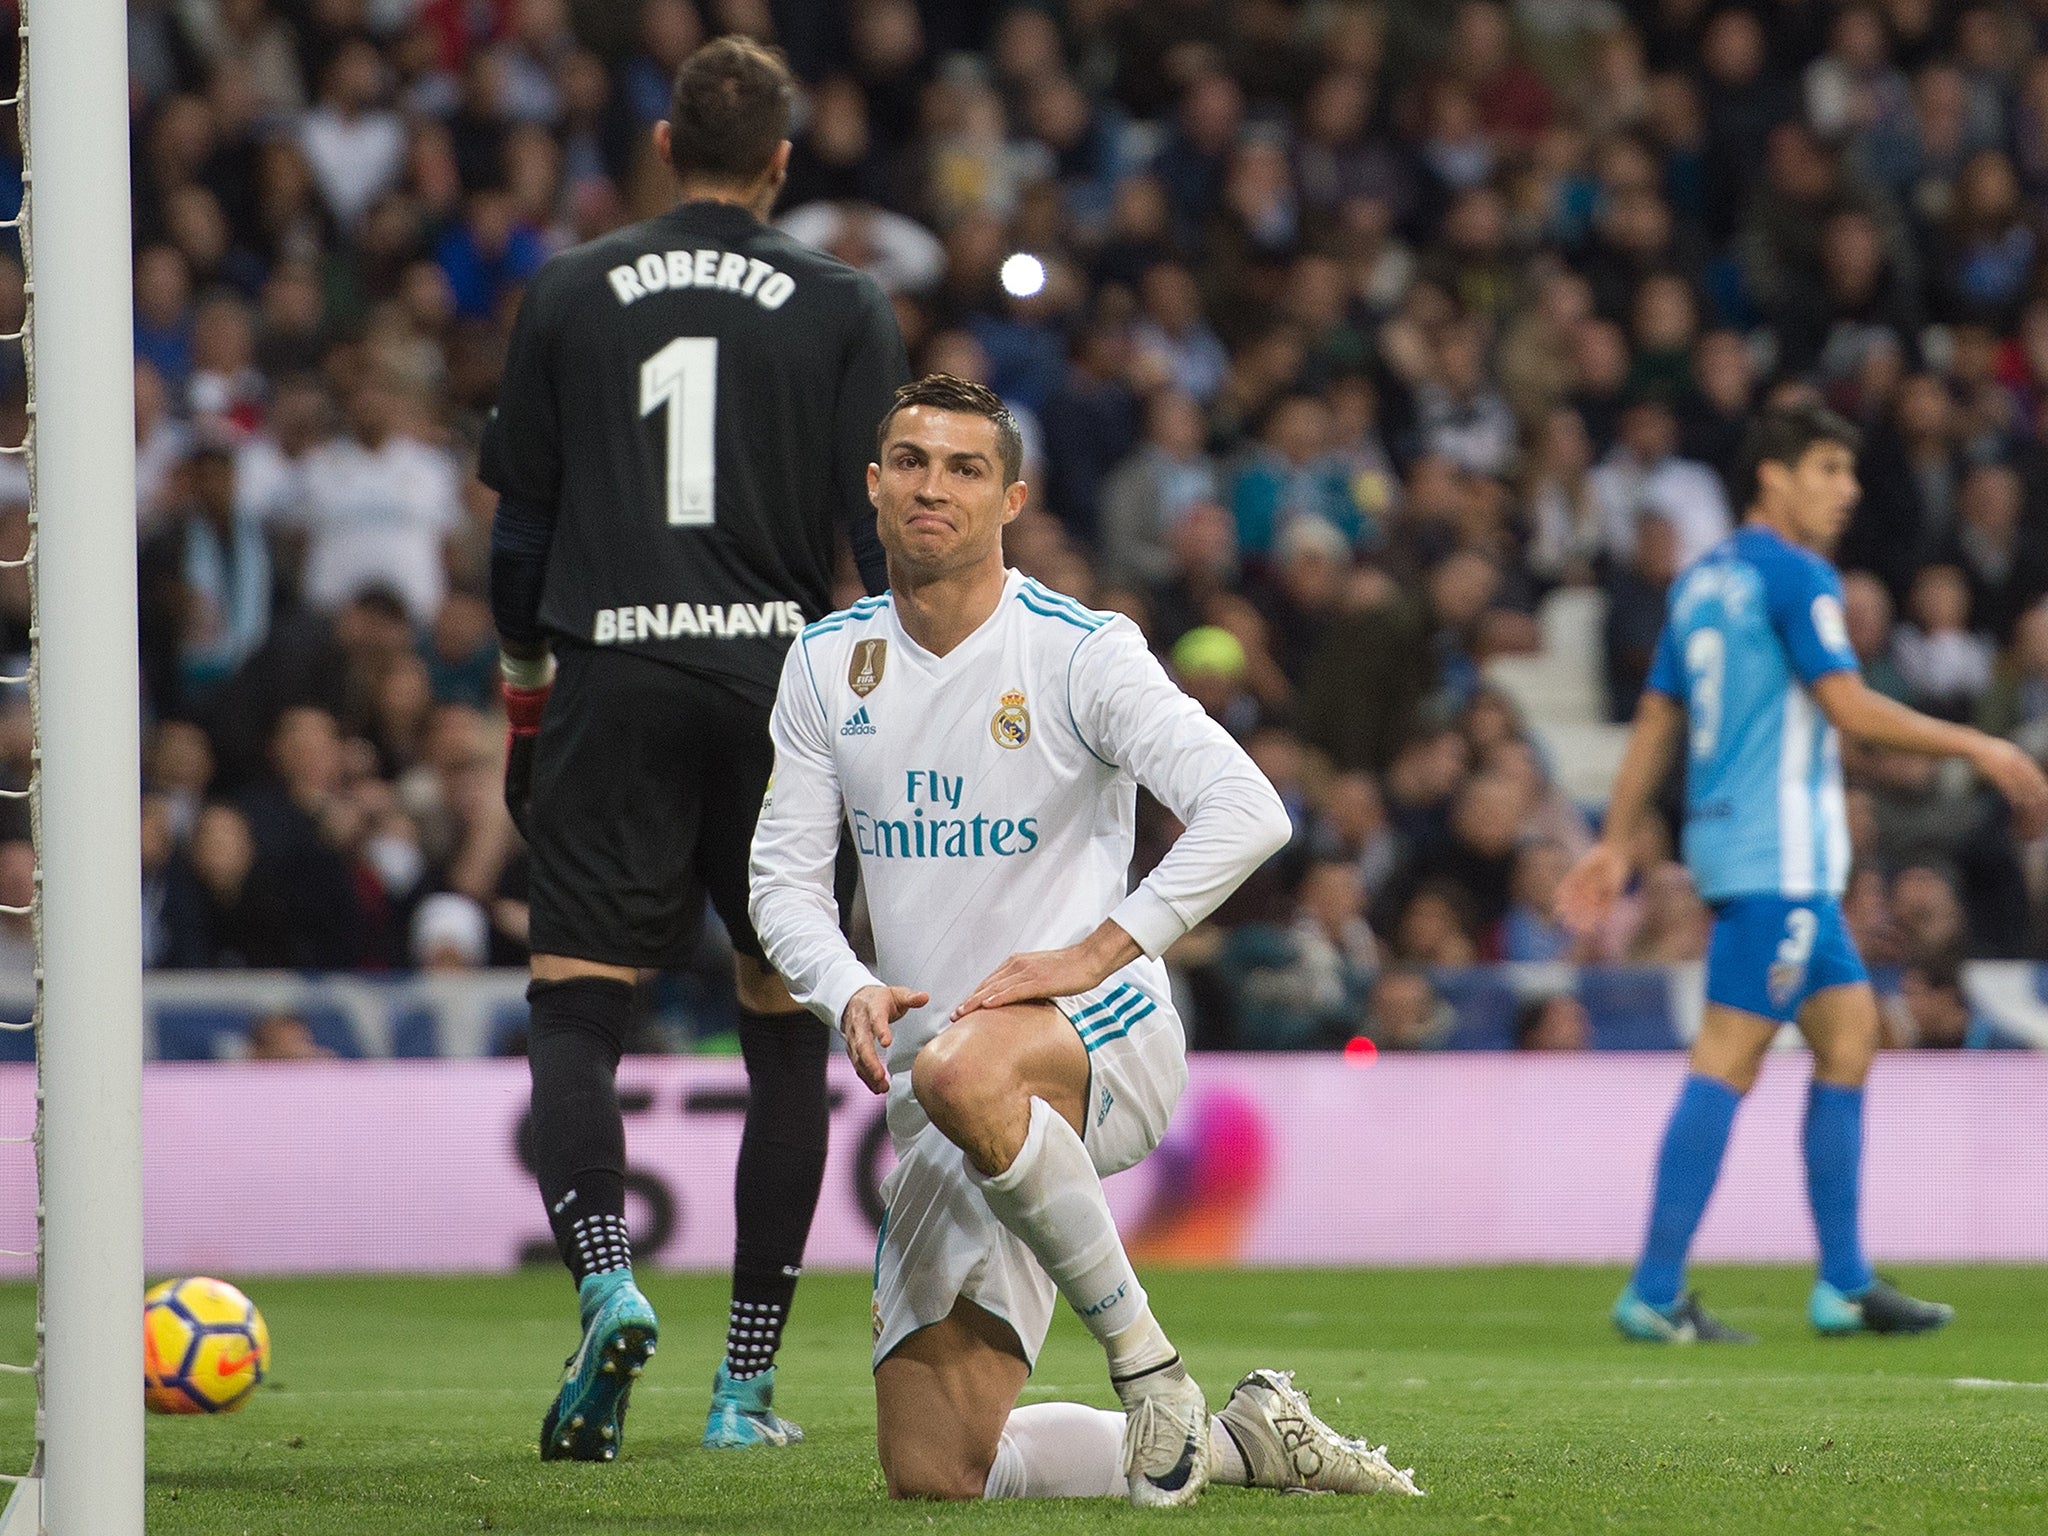 Cristiano Ronaldo saw his penalty saved only to tap in the rebound